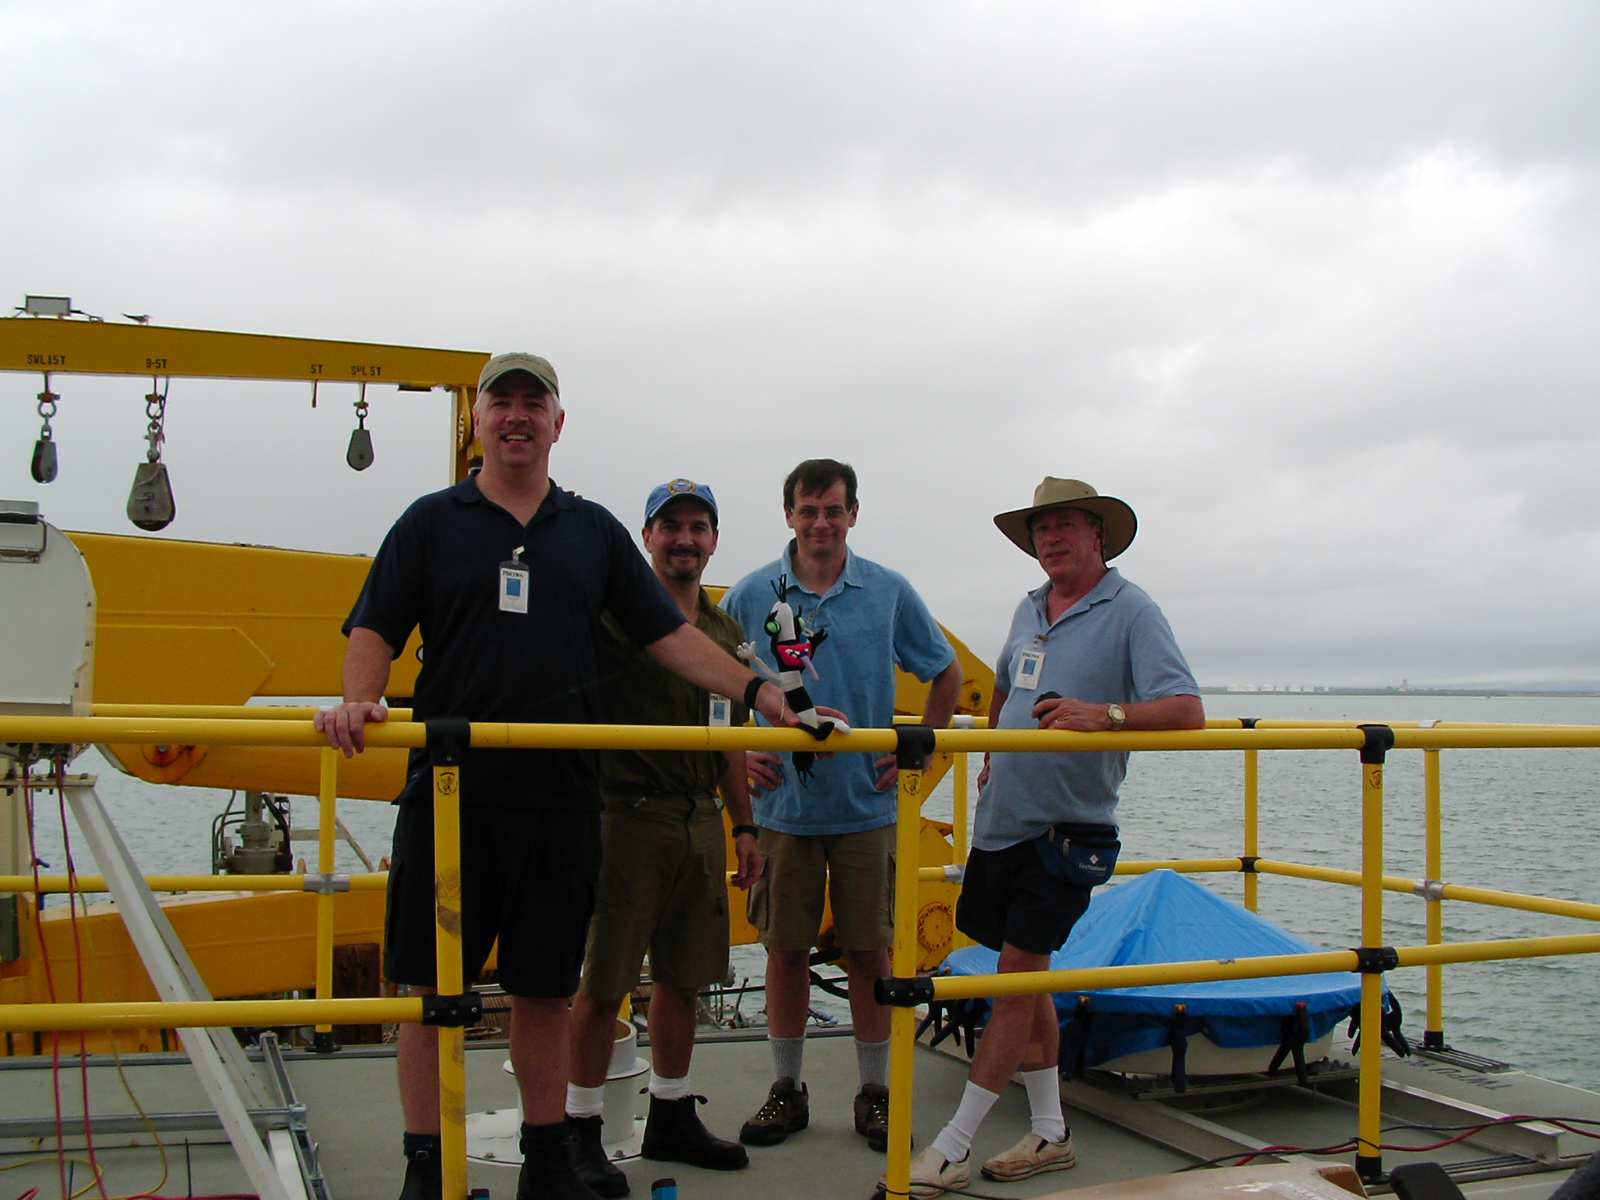 Kevin Widener, Connor Flynn, Jim Mather, and Chuck Long stand on a platform on the water. Widener is propping up PARSL Pete on a yellow railing.